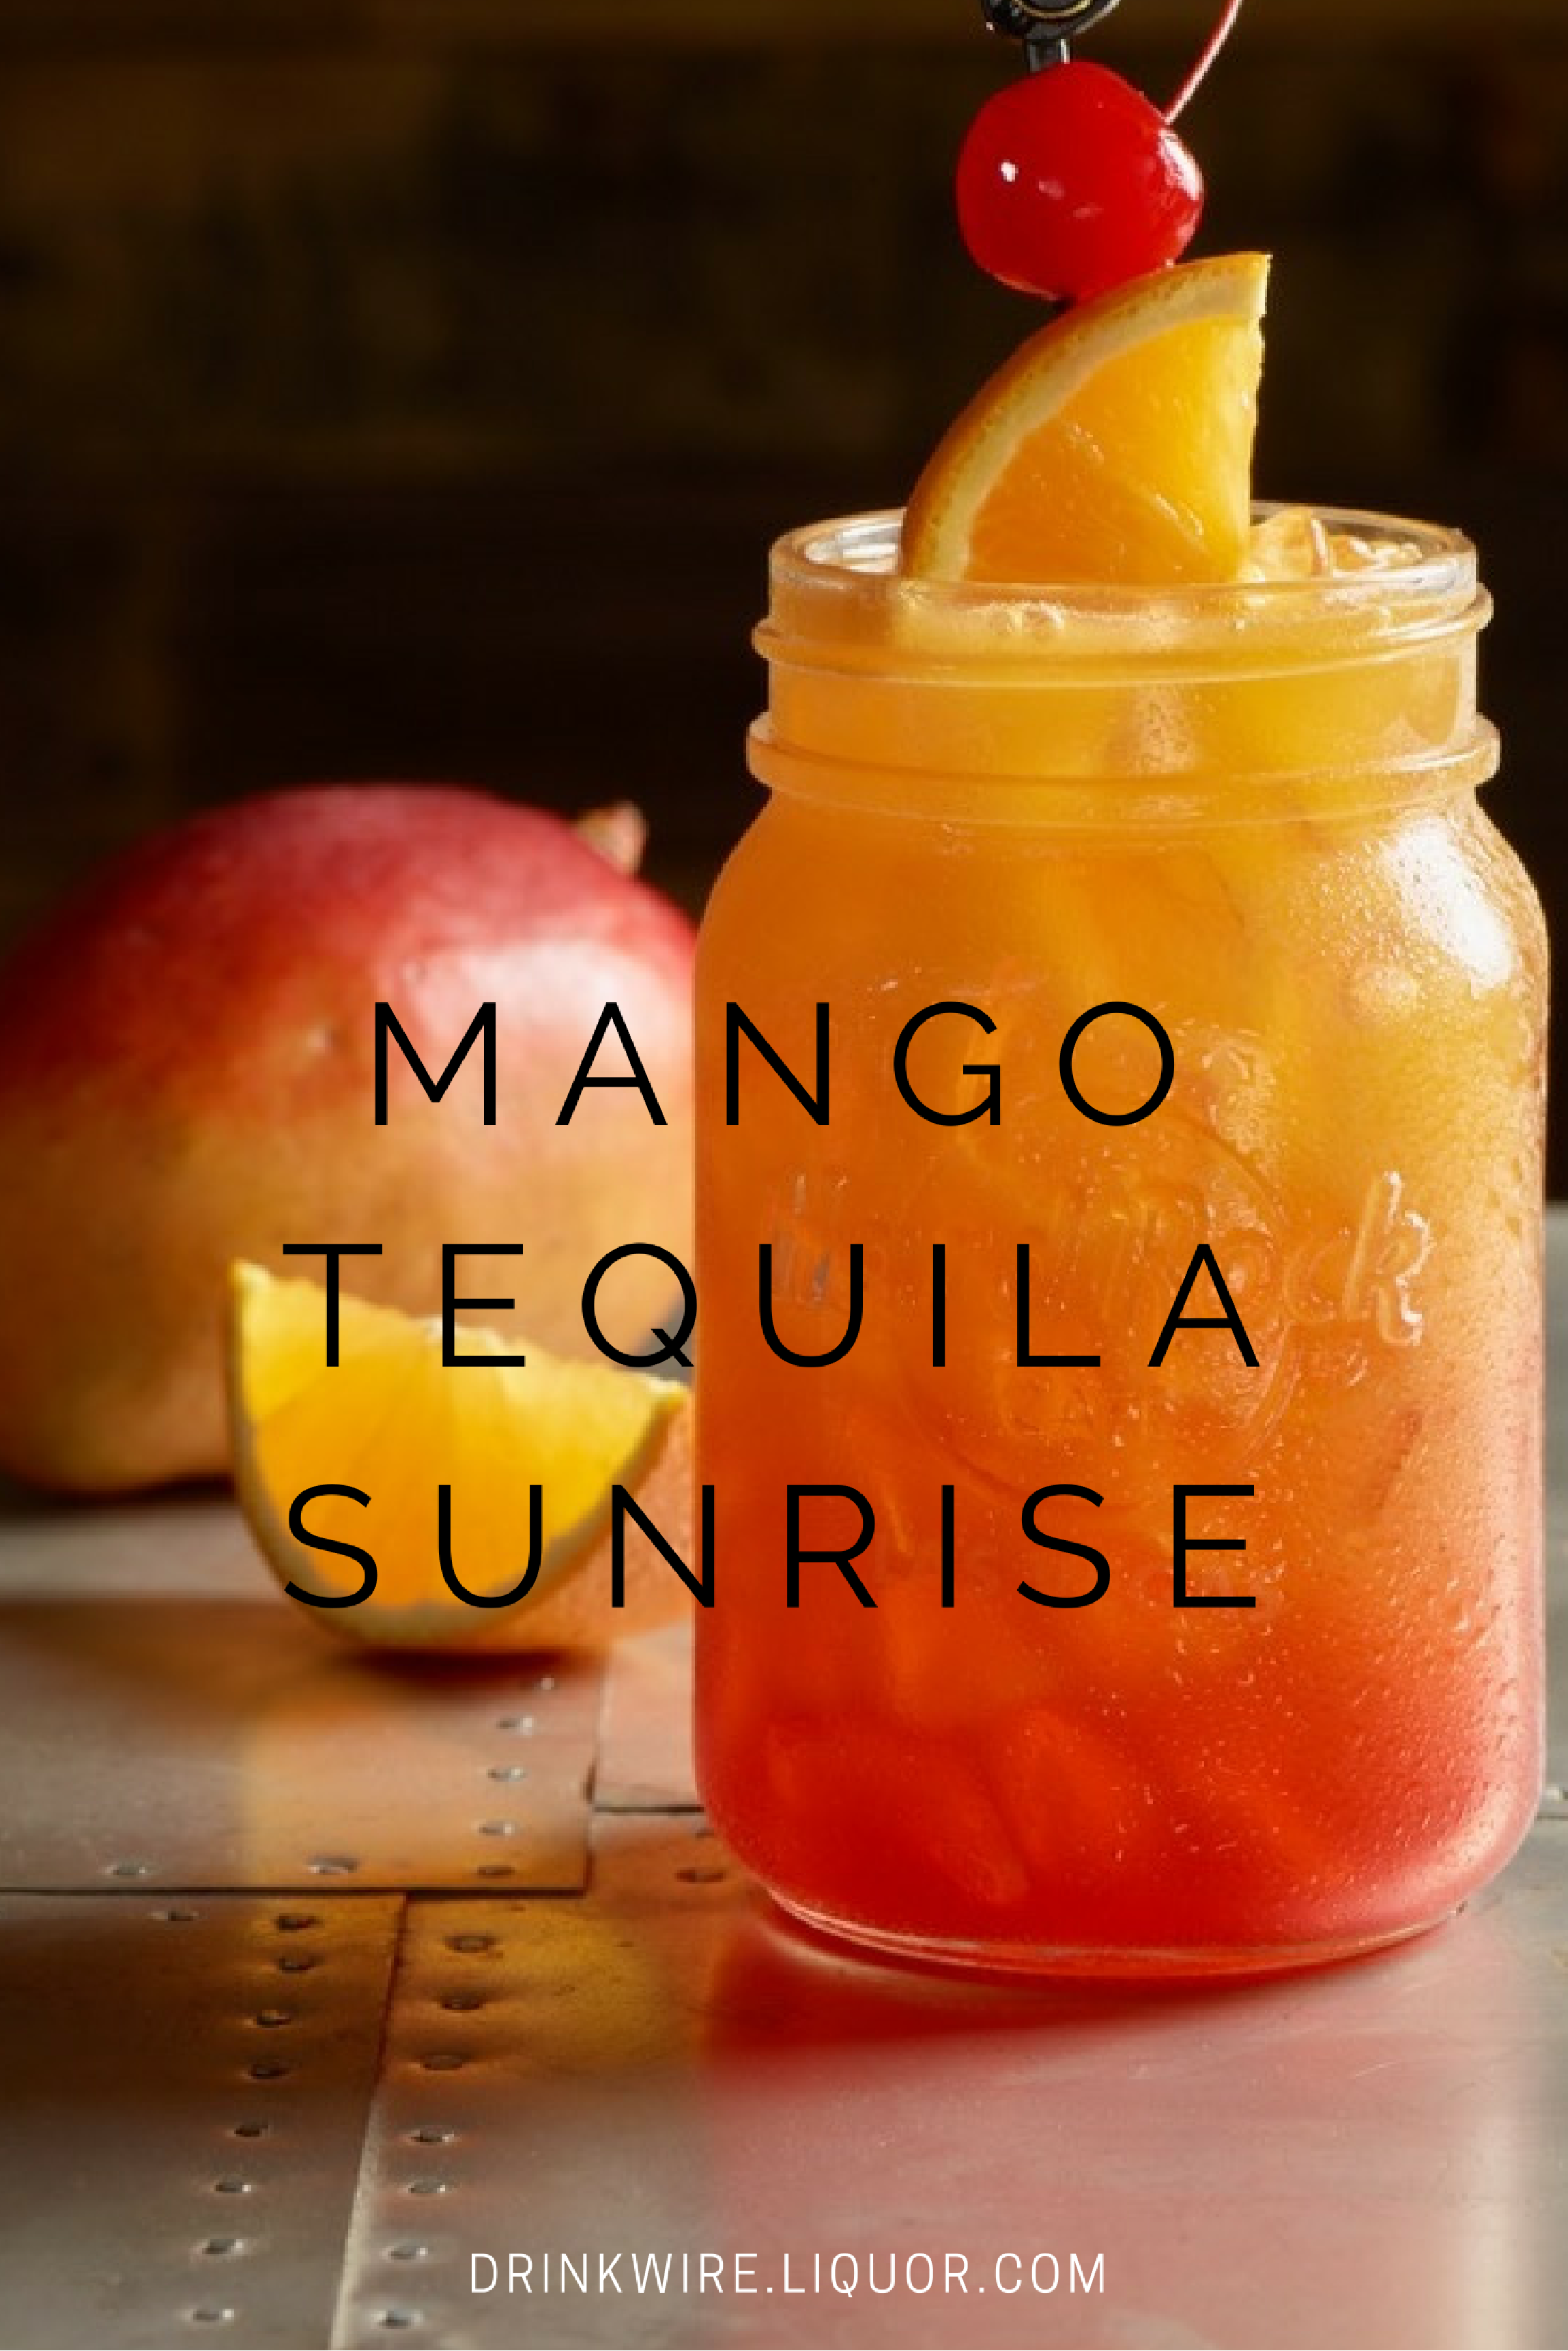 The Tequila Sunrise is the 3